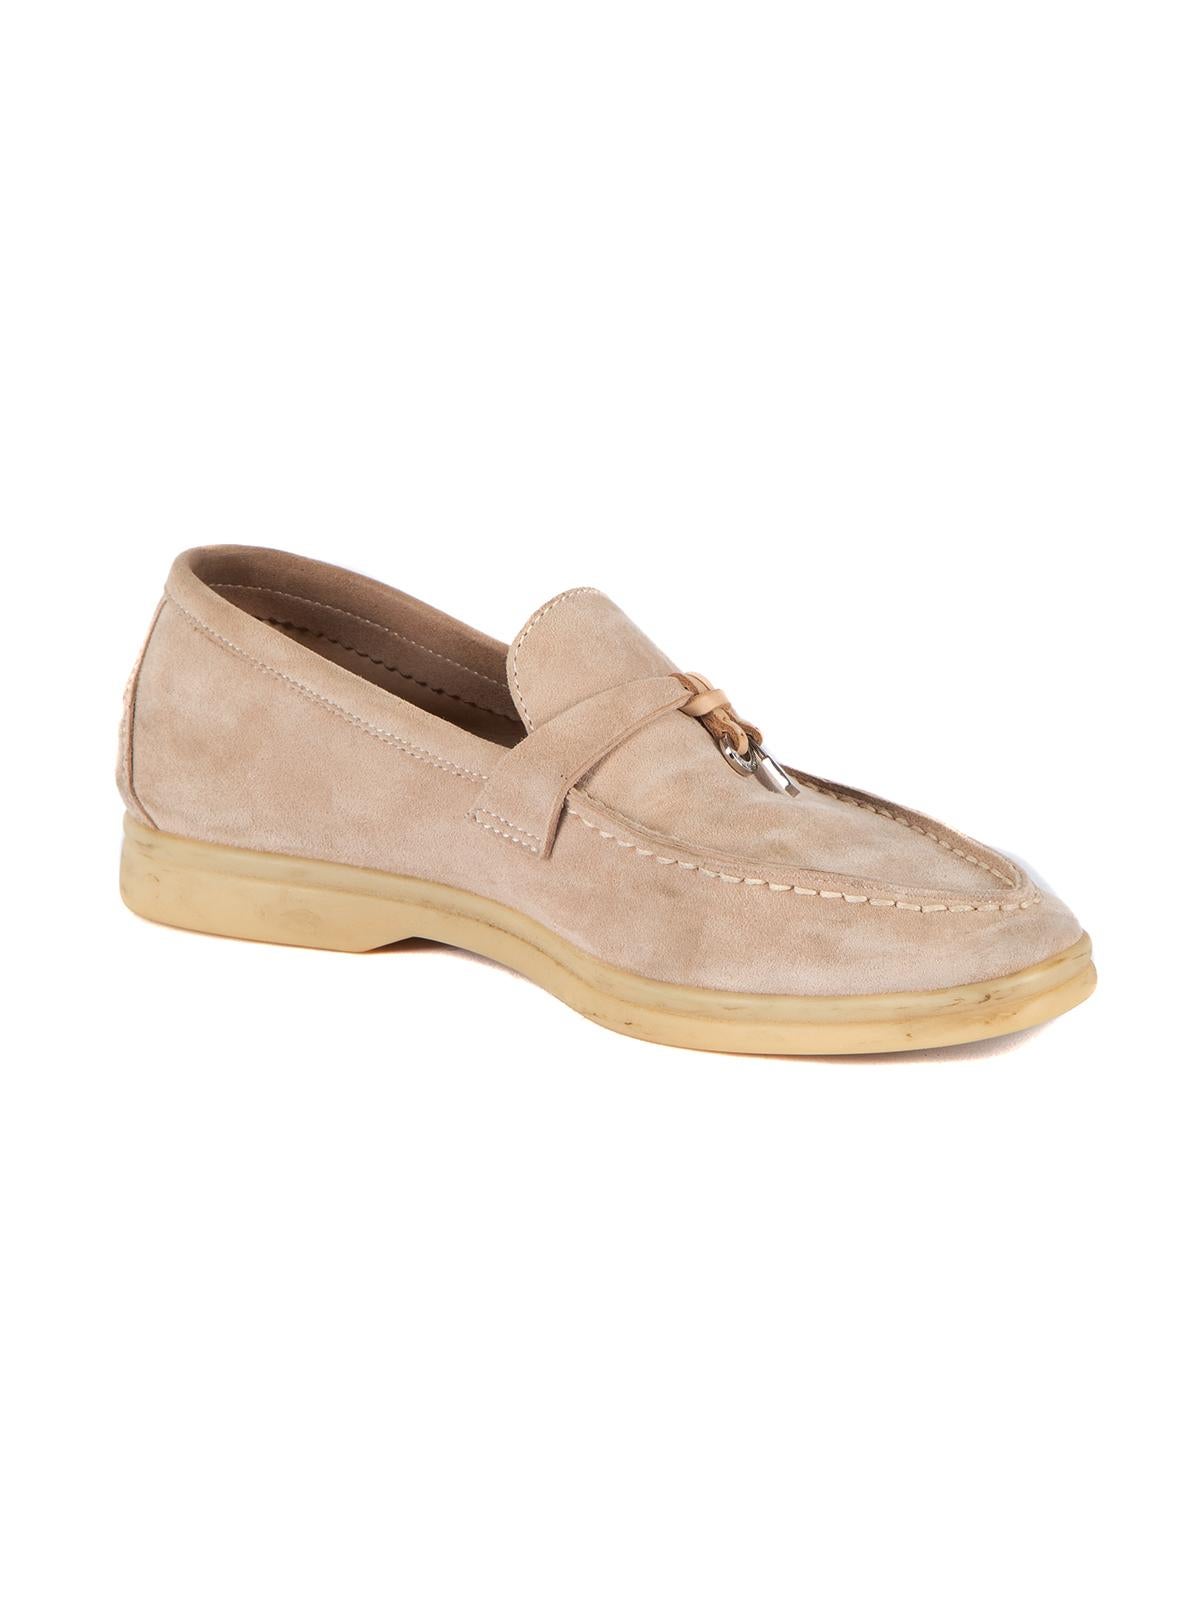 CONDITION is Good. Overall wear to loafers is evident. Some scuff marks can be seen to toes and soles of this used Loro Piana designer resale item. Details Beige Suede Flat Almond toe Silver tone charms Slip on Made in Italy Composition EXTERIOR: